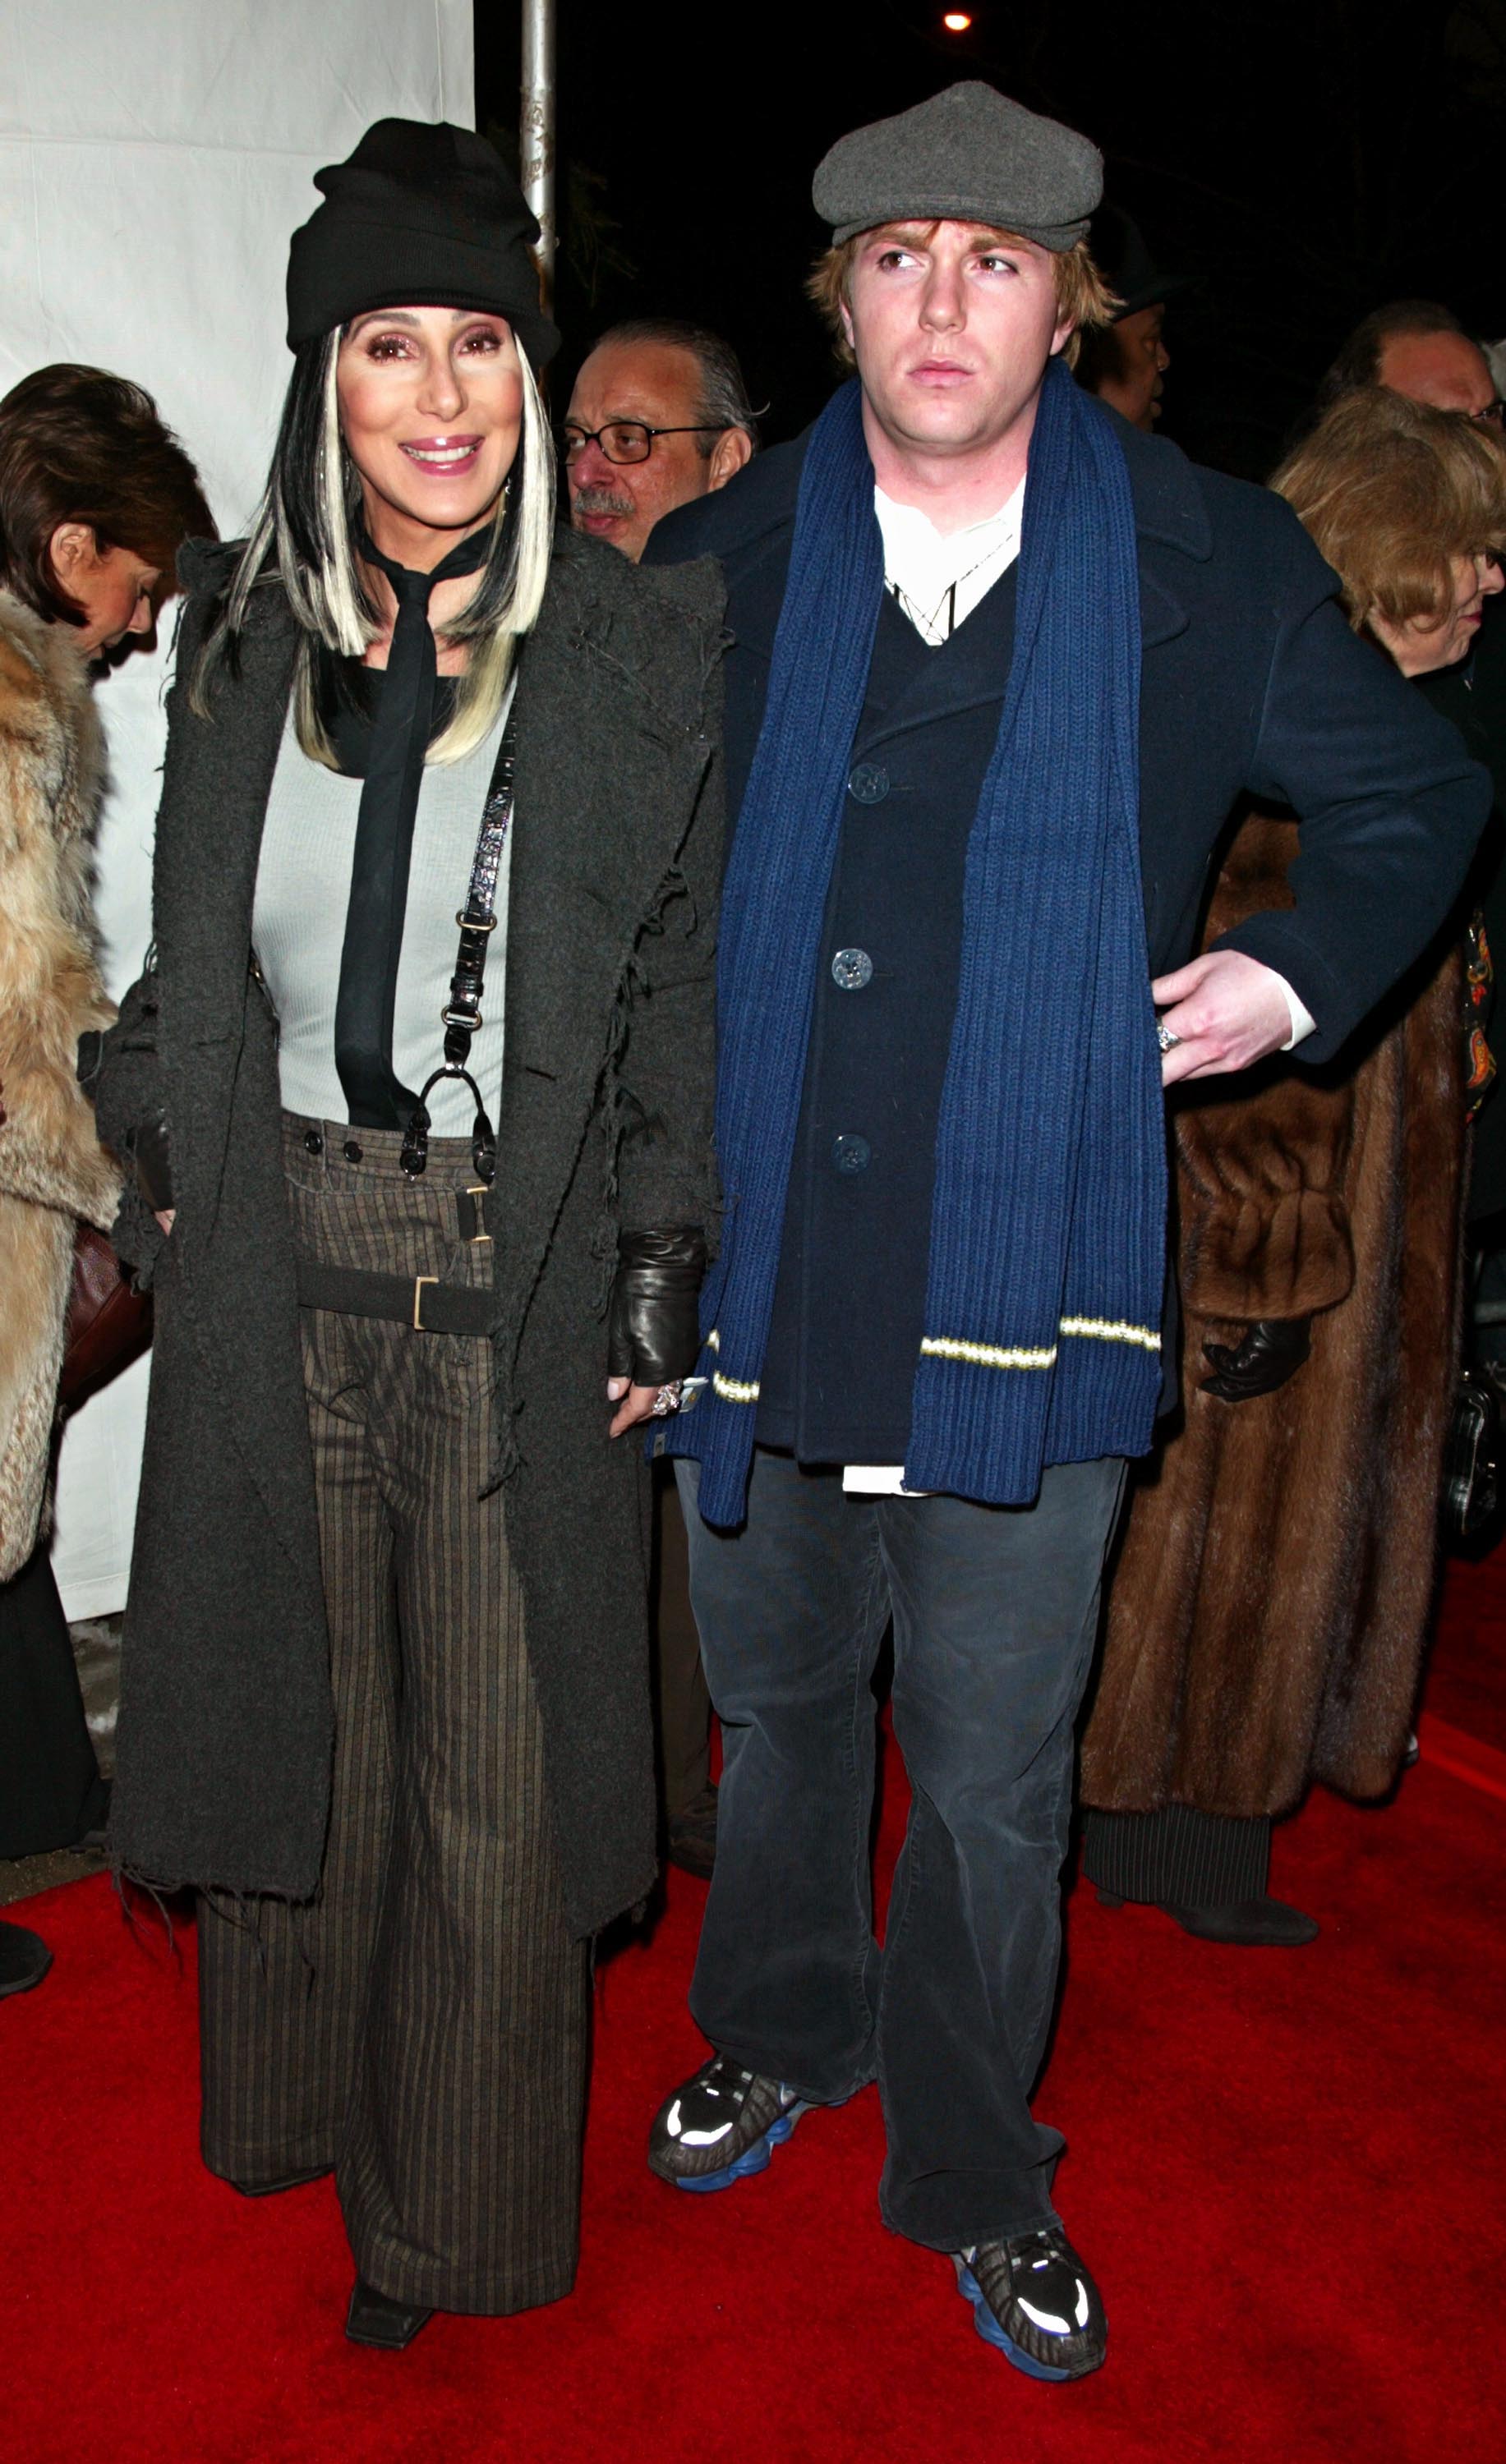 Cher and Elijah Blue Allman at the "Stuck on You" - New York Premiere on May 29, 2009. | Source: Getty Images